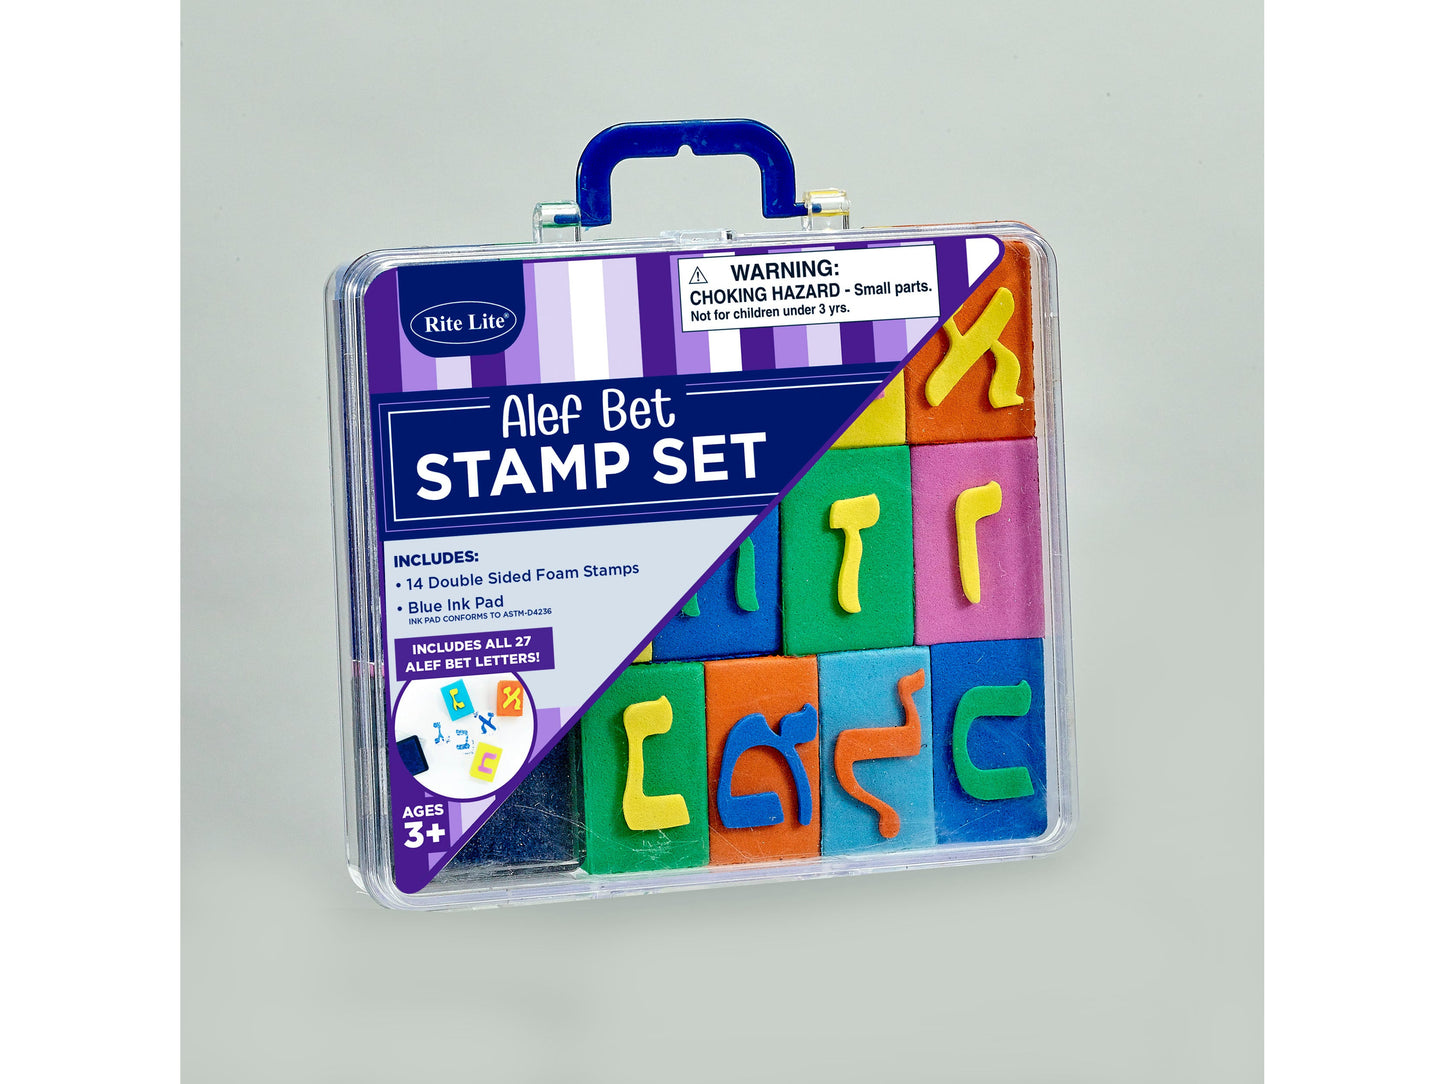 Alef bet stamp set in carrying case